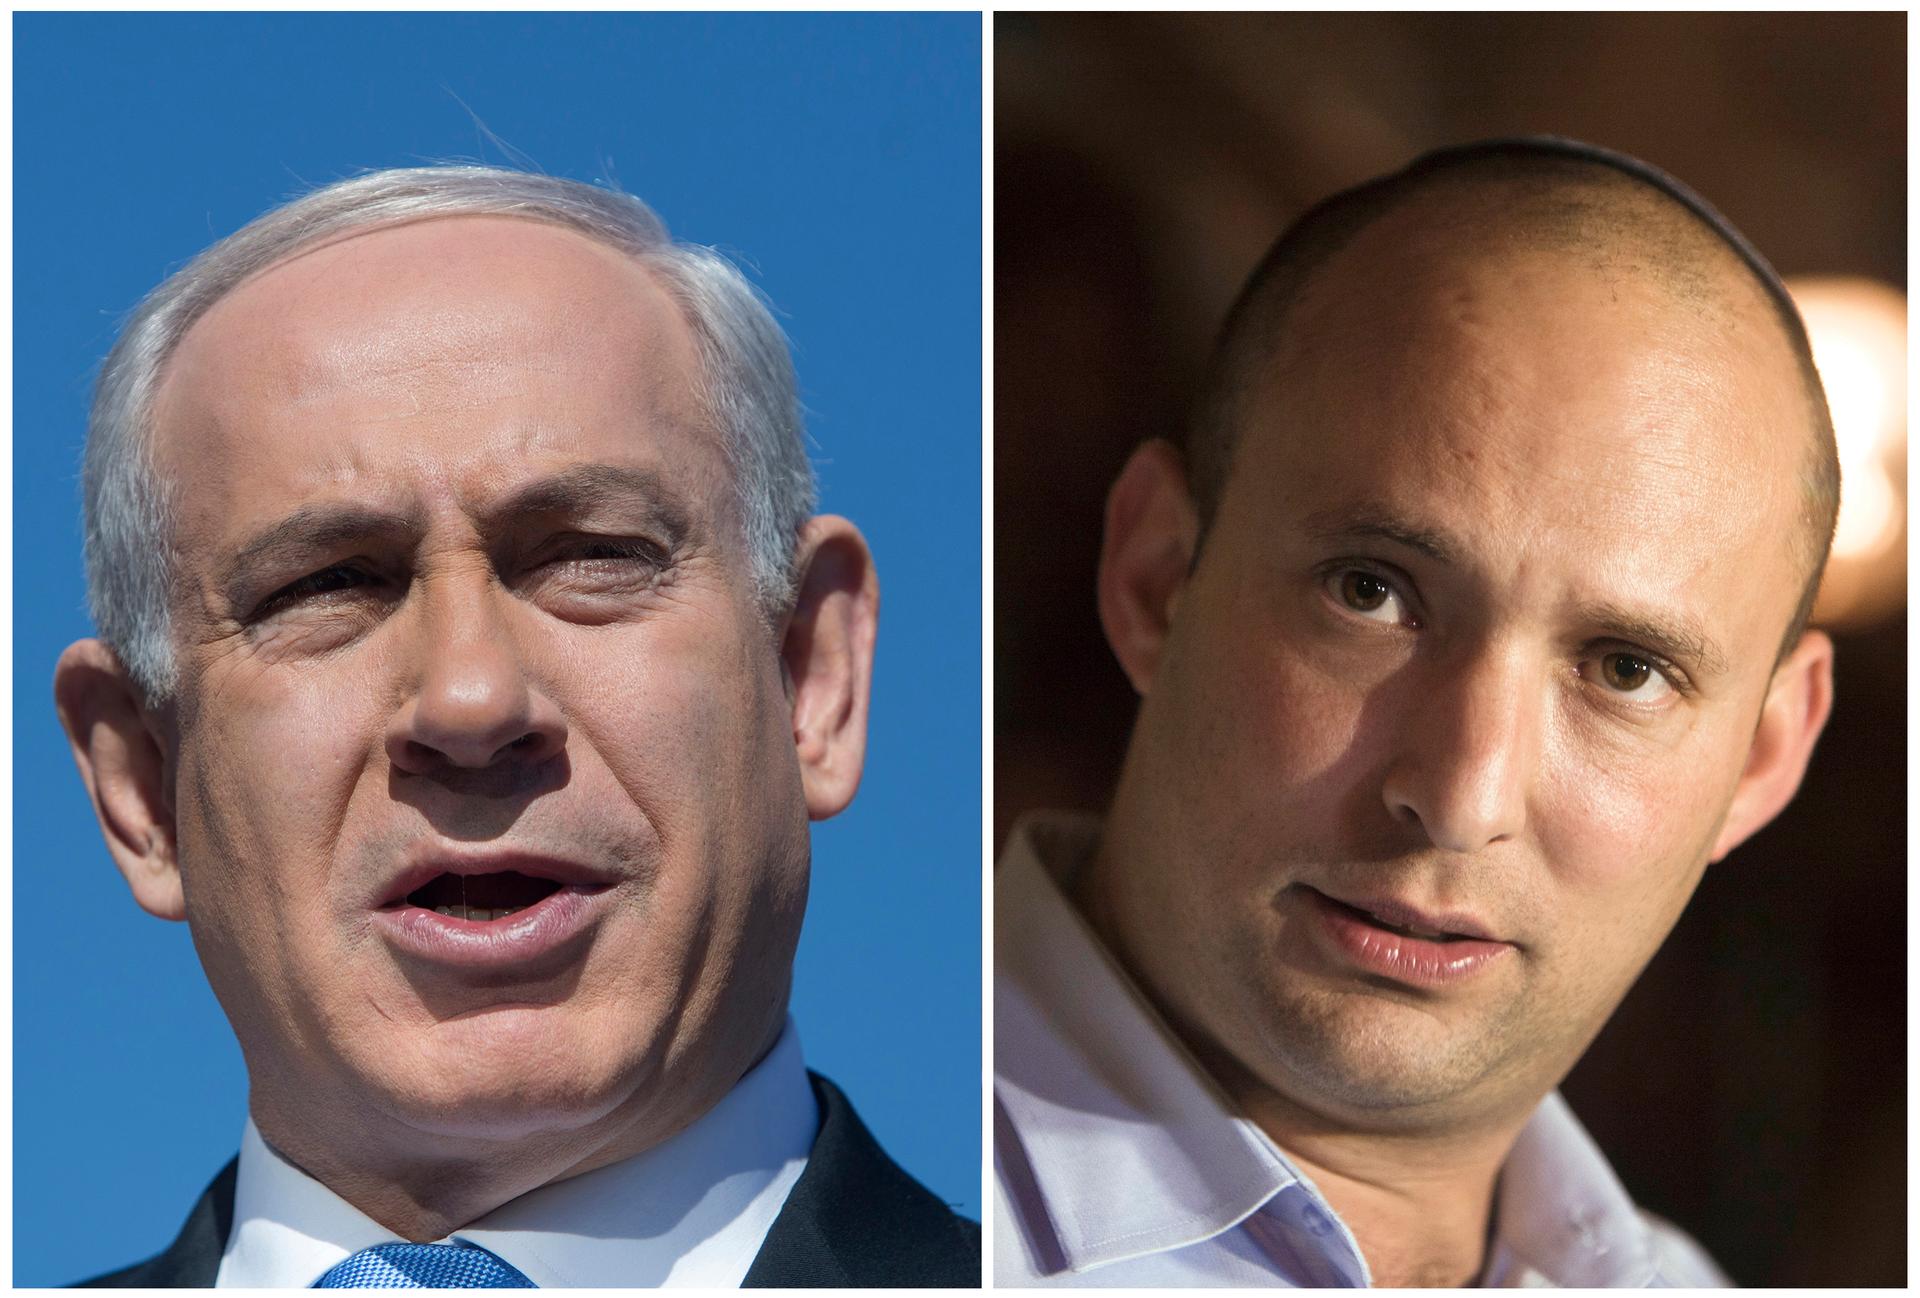 Israeli coalition partners Prime Minister Benjamin Netanyahu and Economy Minister Naftali Bennett have lately been at each other's throats.